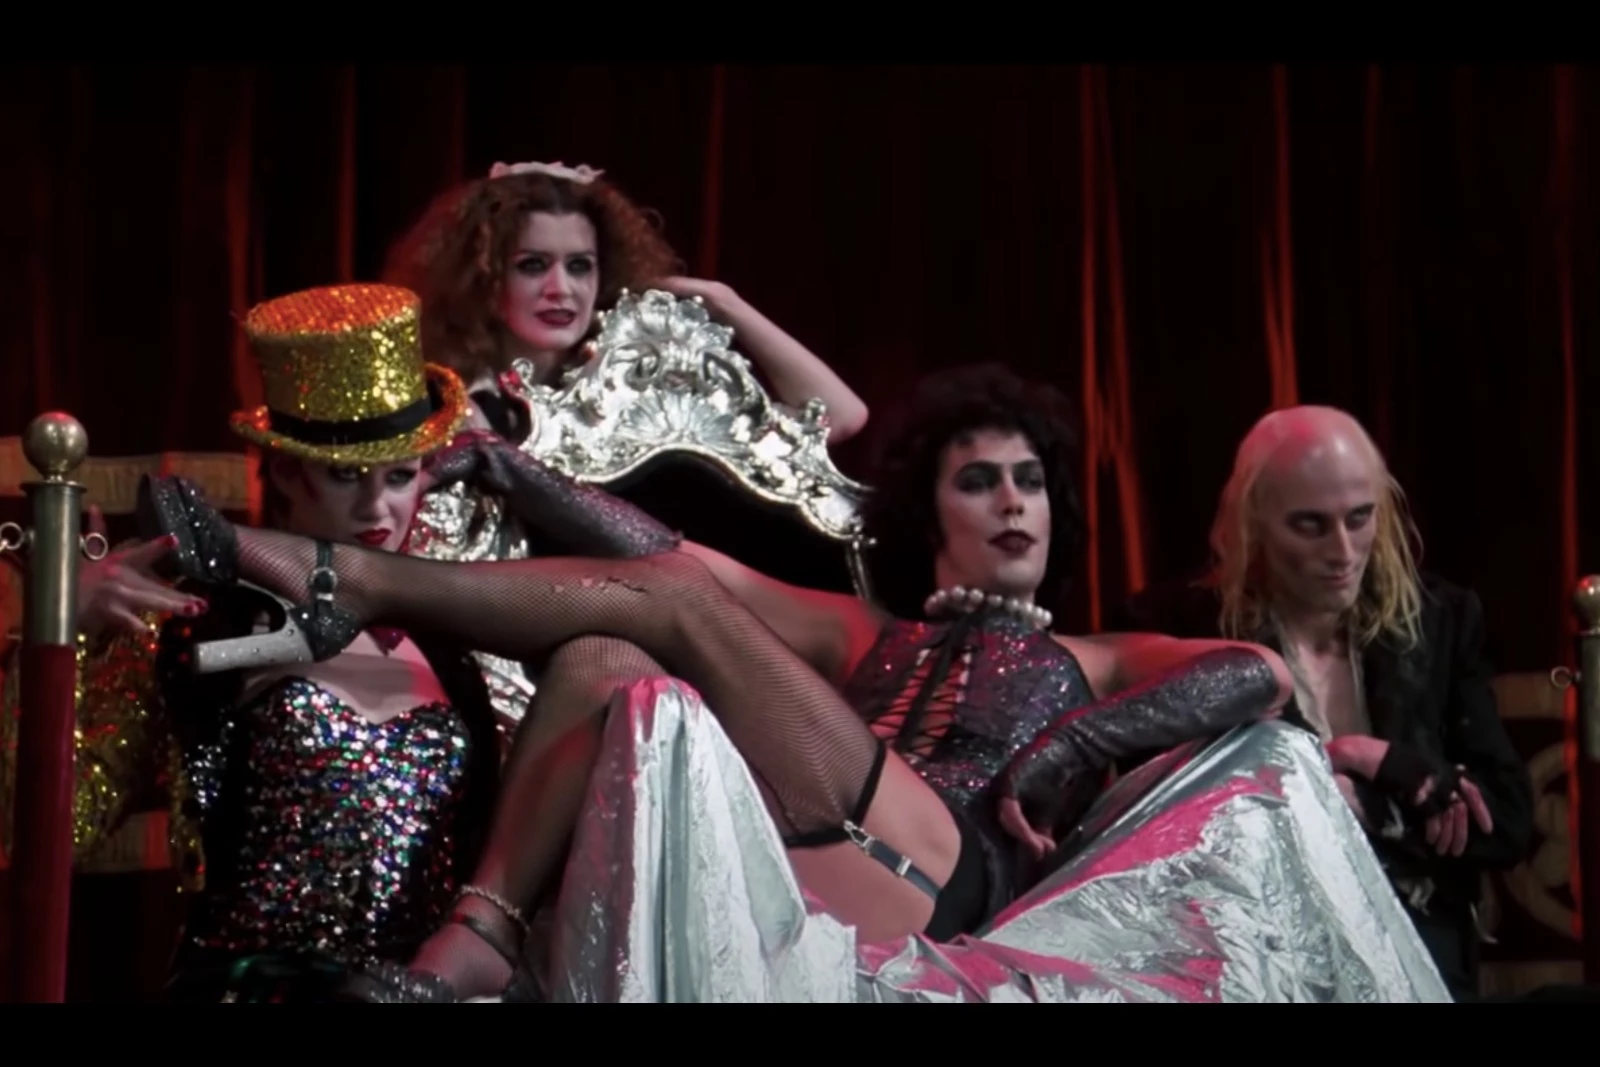 Naturist Beach Squirt - Rocky Horror Picture Show coming to State Theatre New Jersey